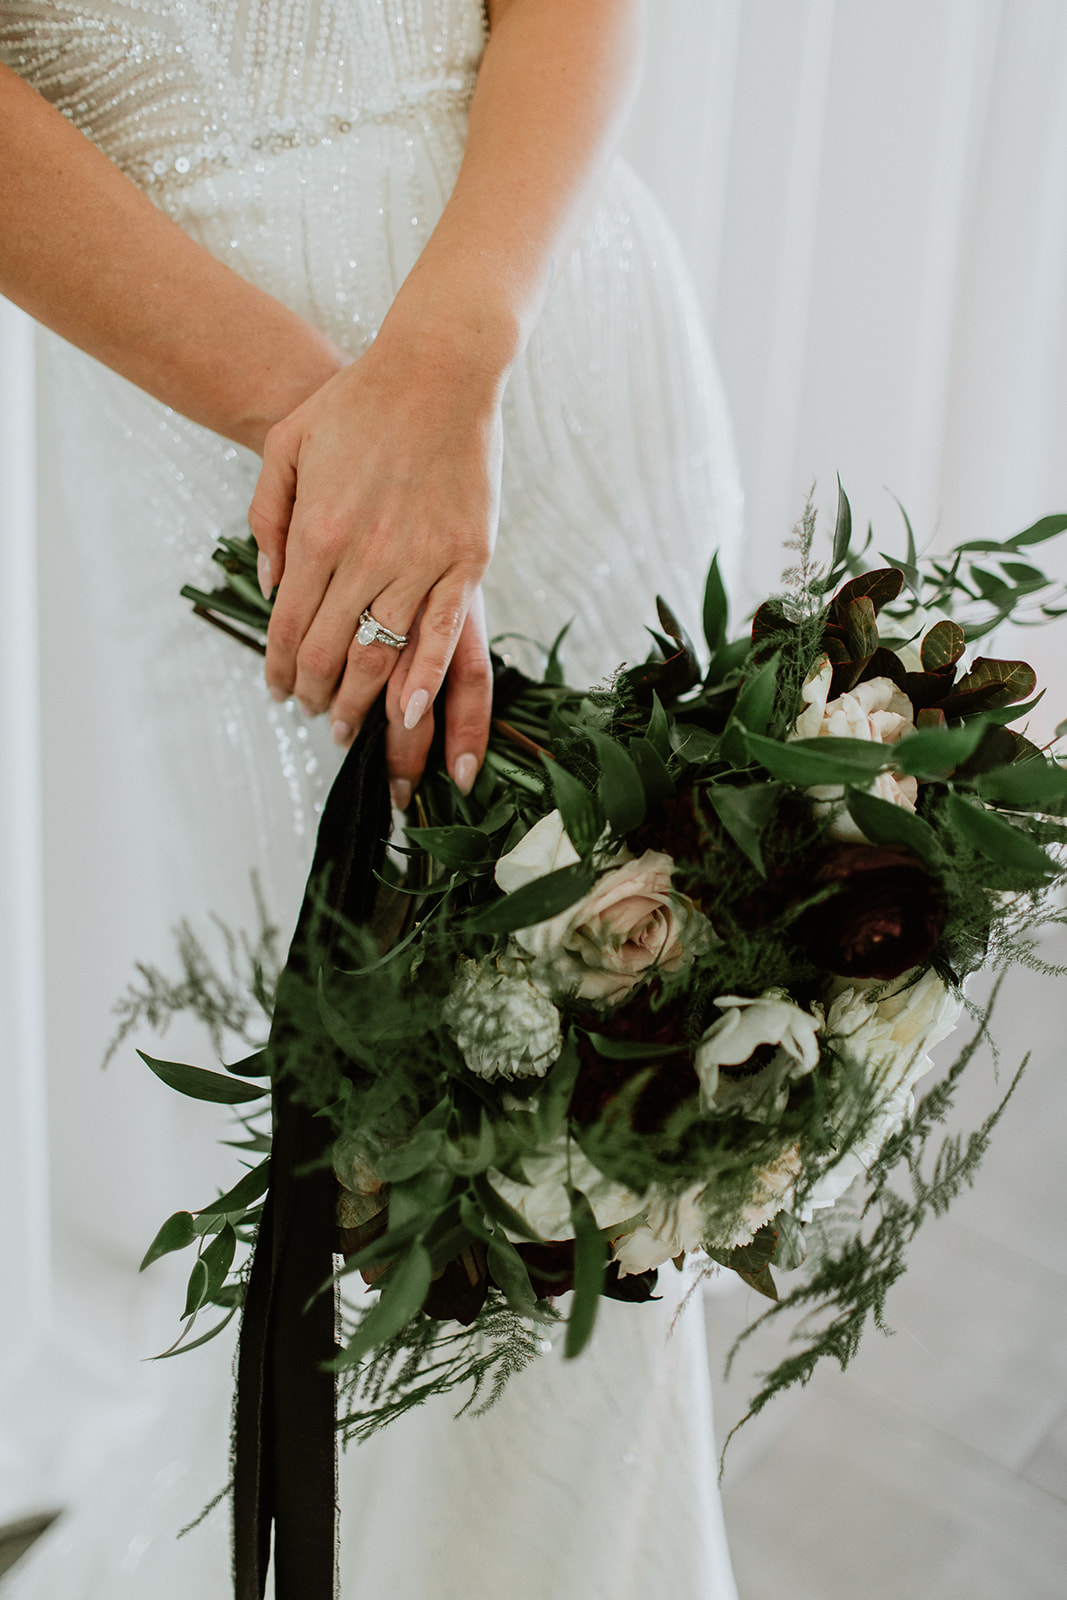 Brides hands with Wedding Ring holding lush green white and black  bouquet 